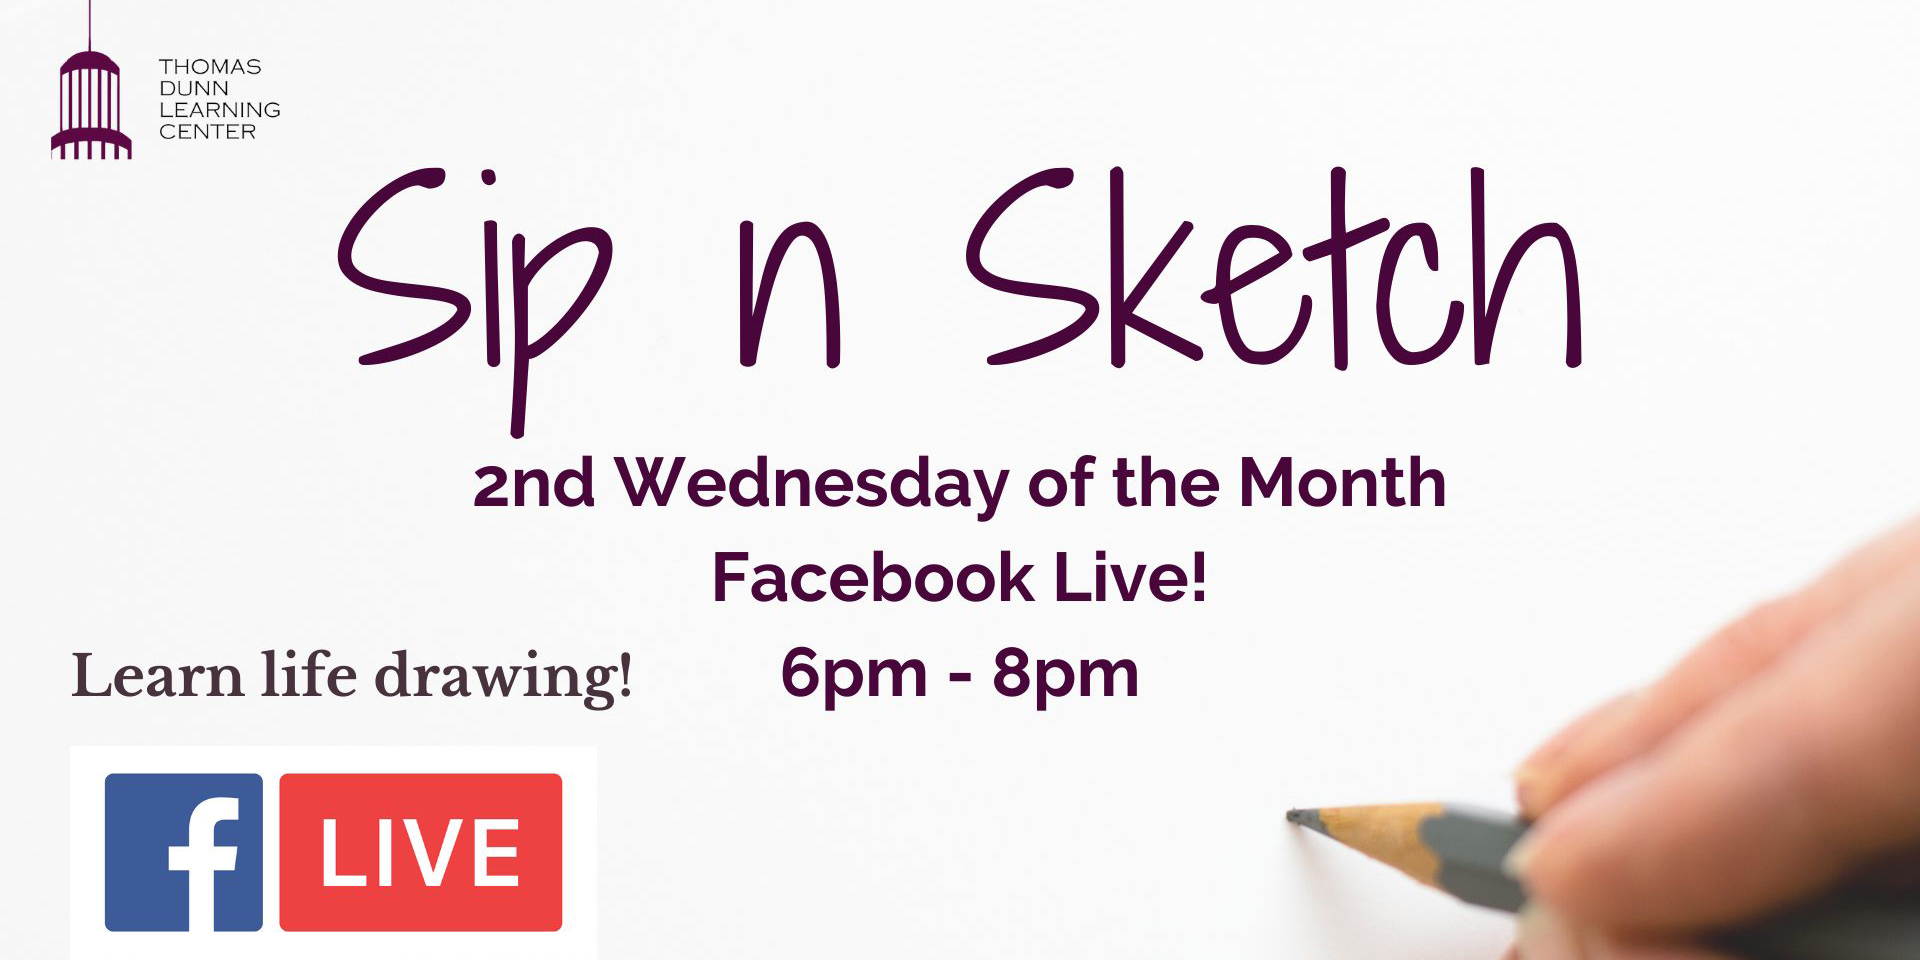 Sip 'n Sketch, second Wednesday of the month at Thomas Dunn Learning Center.